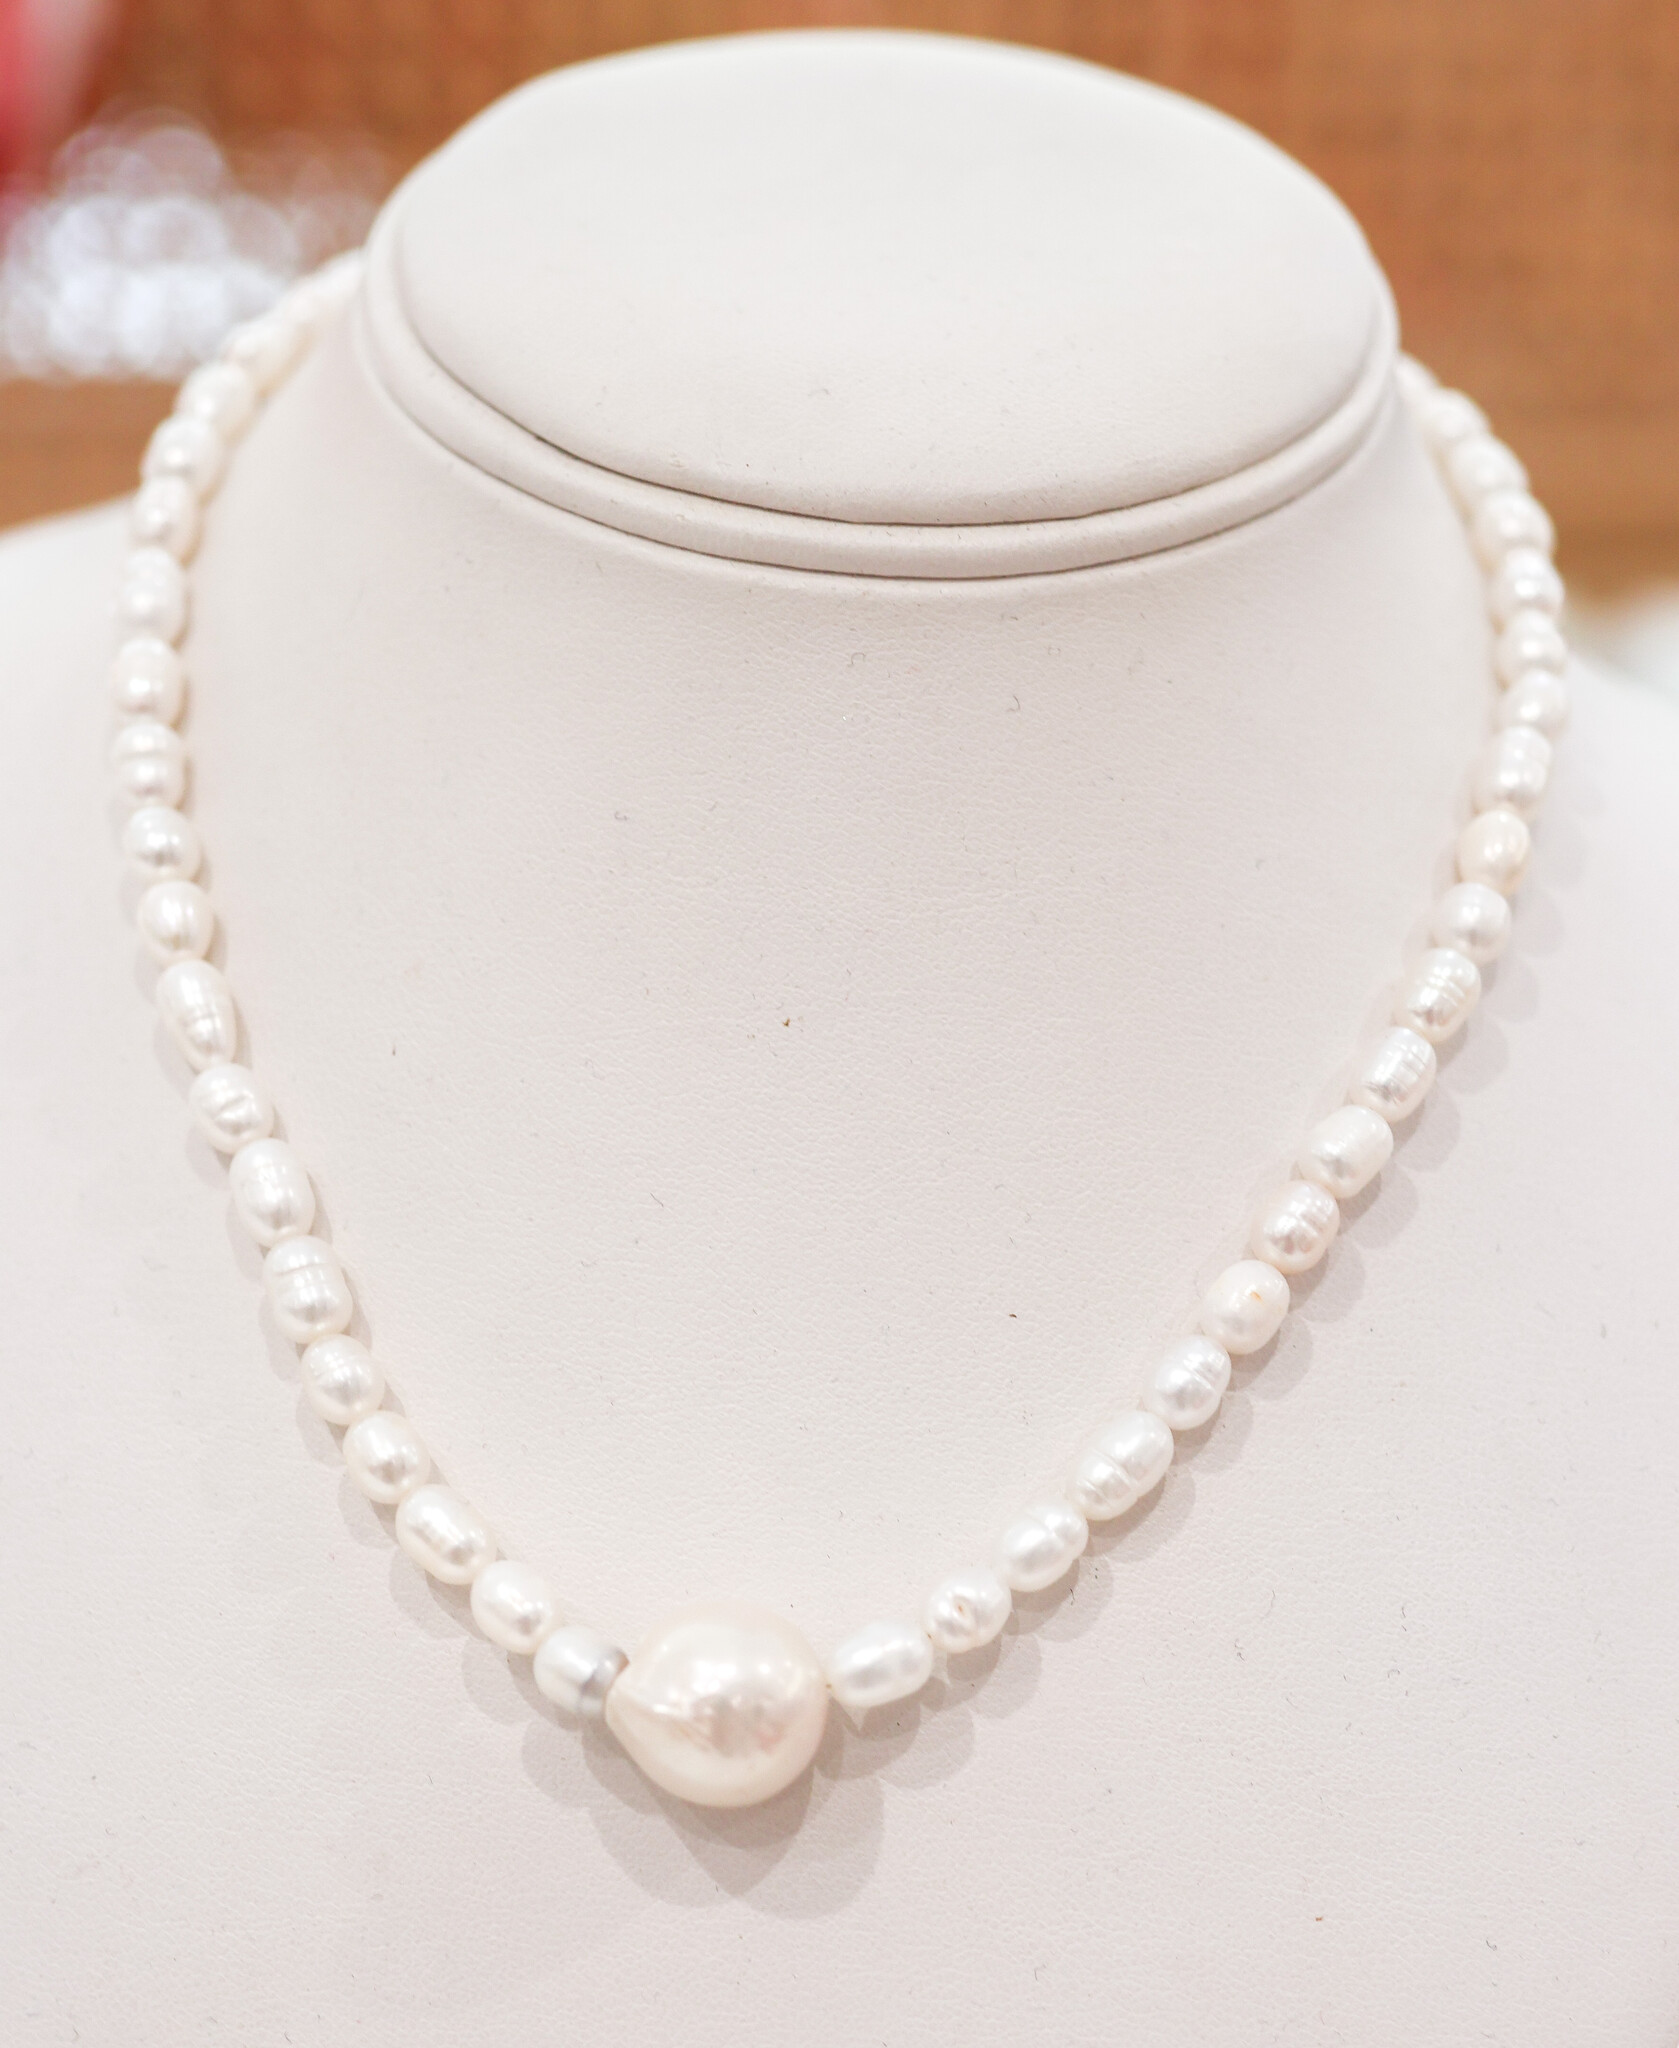 Double Strand Pearl Necklace - The Pearl Girls